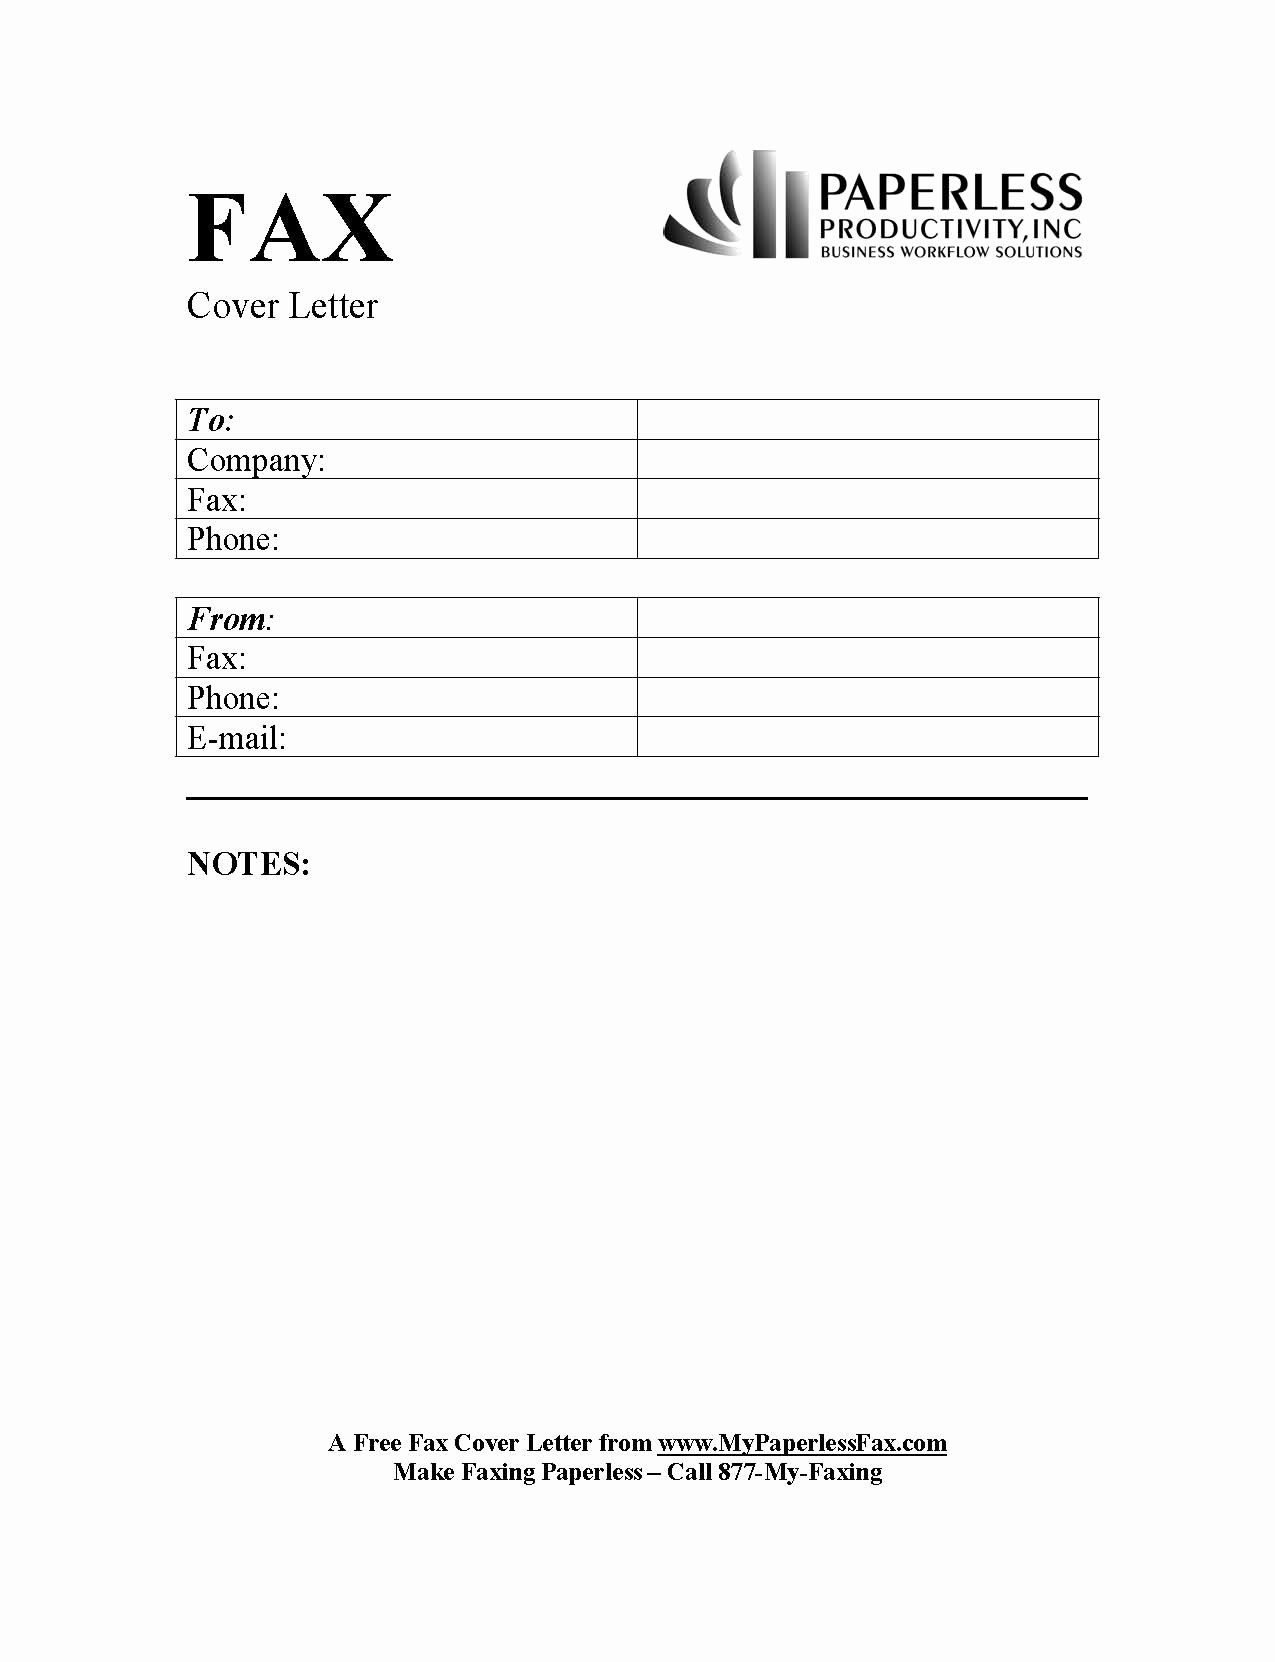 Fax Cover Sheet Pdf format Lovely Microsoft Fice Fax Cover Sheet Template